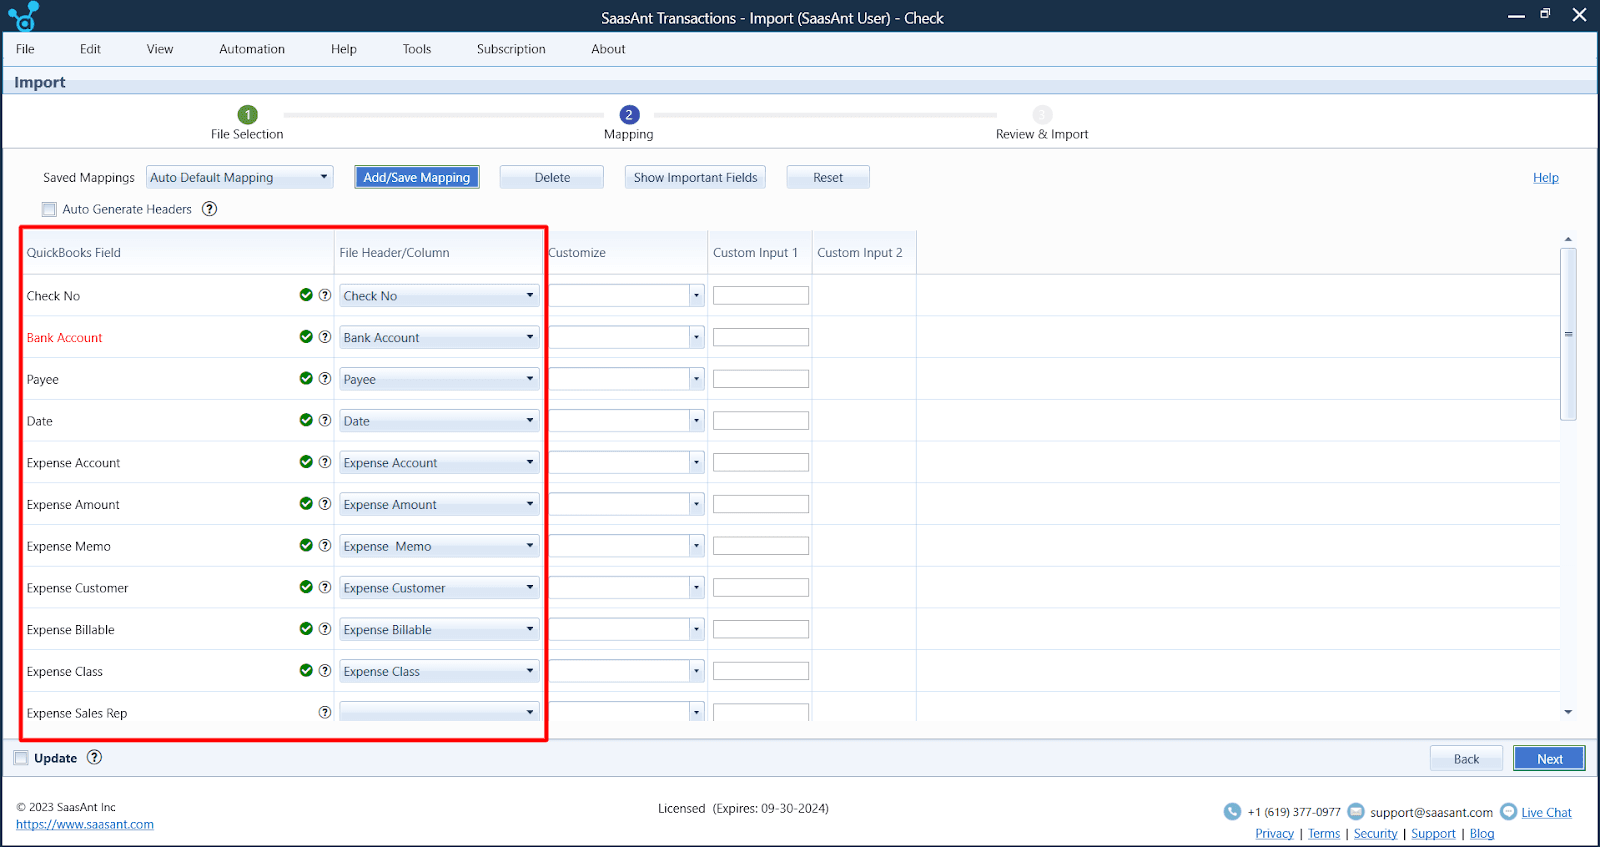 Map the fields in your data file to the QuickBooks fields